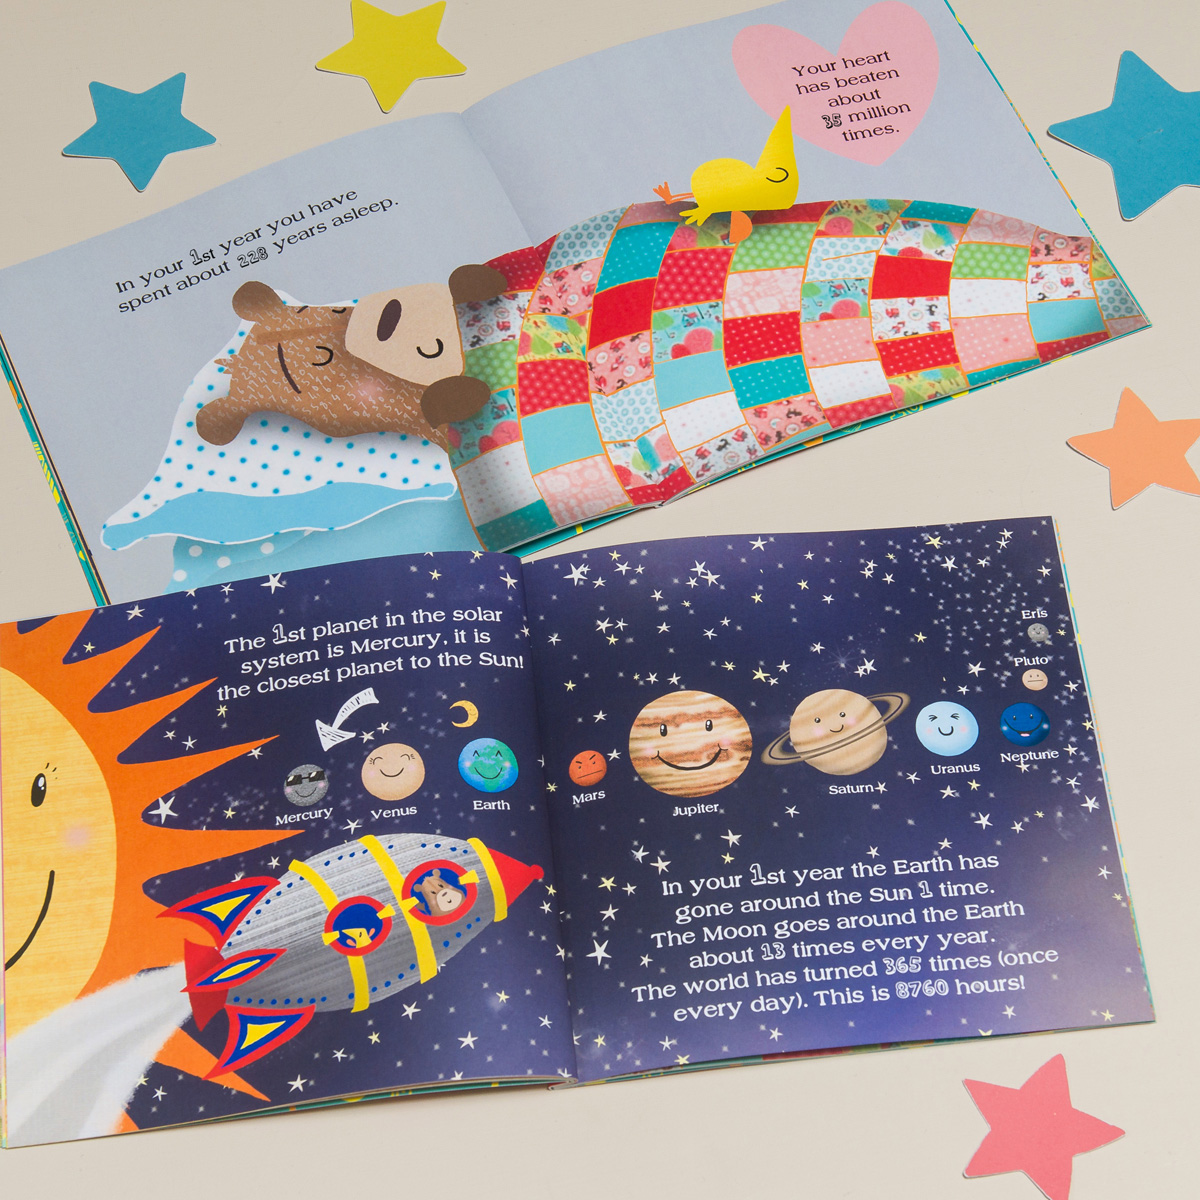 Personalised Children's Book - 'Wow You're One' 1st Birthday